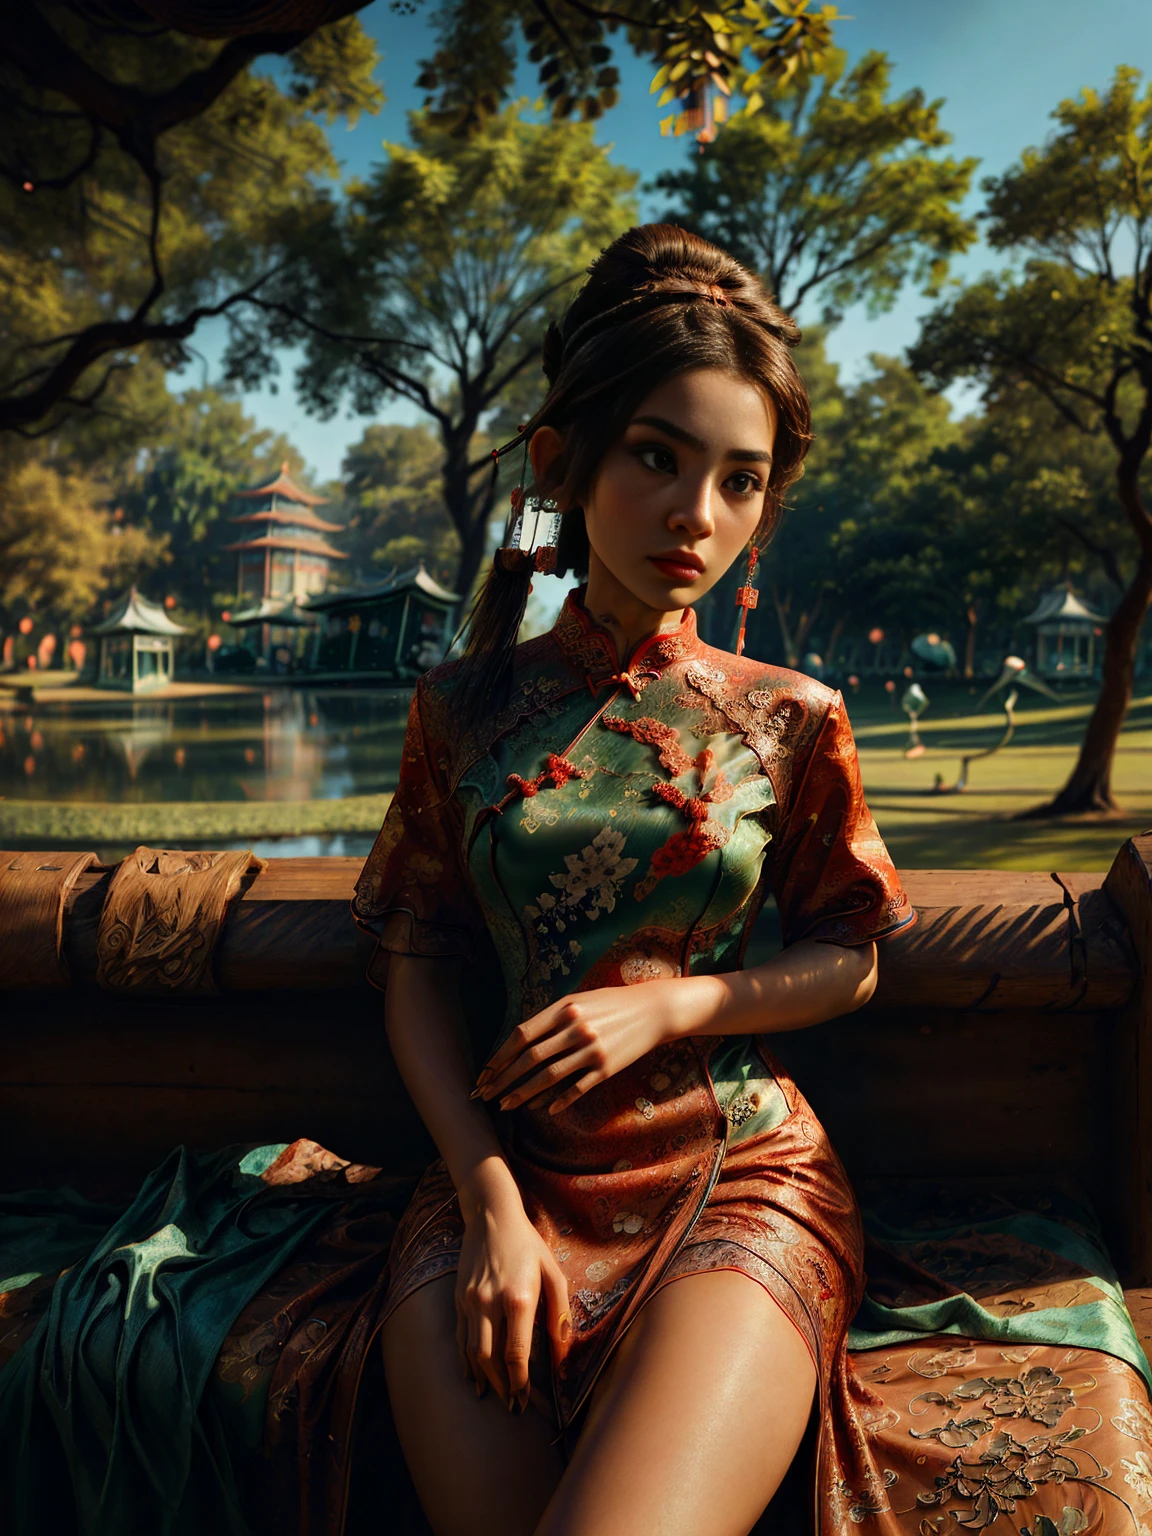 ((a detailed beautiful girl with Cheongsam in Cantonese, It is a type of female dress of Manchu origin used in China, beautiful colors., pink cyan, green:1.5)), detailed eyes, detailed face, long eyelashes, detailed hair and updo elegant and beautiful dressed elegantly, standing under a tree, sunlight splashing on the leaves, vibrant colors, photorealistic, 8K, high quality, cinematic lighting, portrait, (Best Quality,4k,8K,high resolution,masterpiece:1.2),ultra detailed,sharp focus, Very detailed face,extremely detailed facial features,hyper realista skin texture,extremely fine details,intricate details,detailed eyes,Detailed nose,detailed lips,Detailed facial expressions,intricate facial anatomy,intense lighting, dramatic lighting,Changing lighting,cinematic lighting,chiaroscuro lighting,dramatic shadows,dramatic moments,vivid colors,intense colours,Deep contrast,cinematic depth of field,cinematographic composition,cinematic camera angle